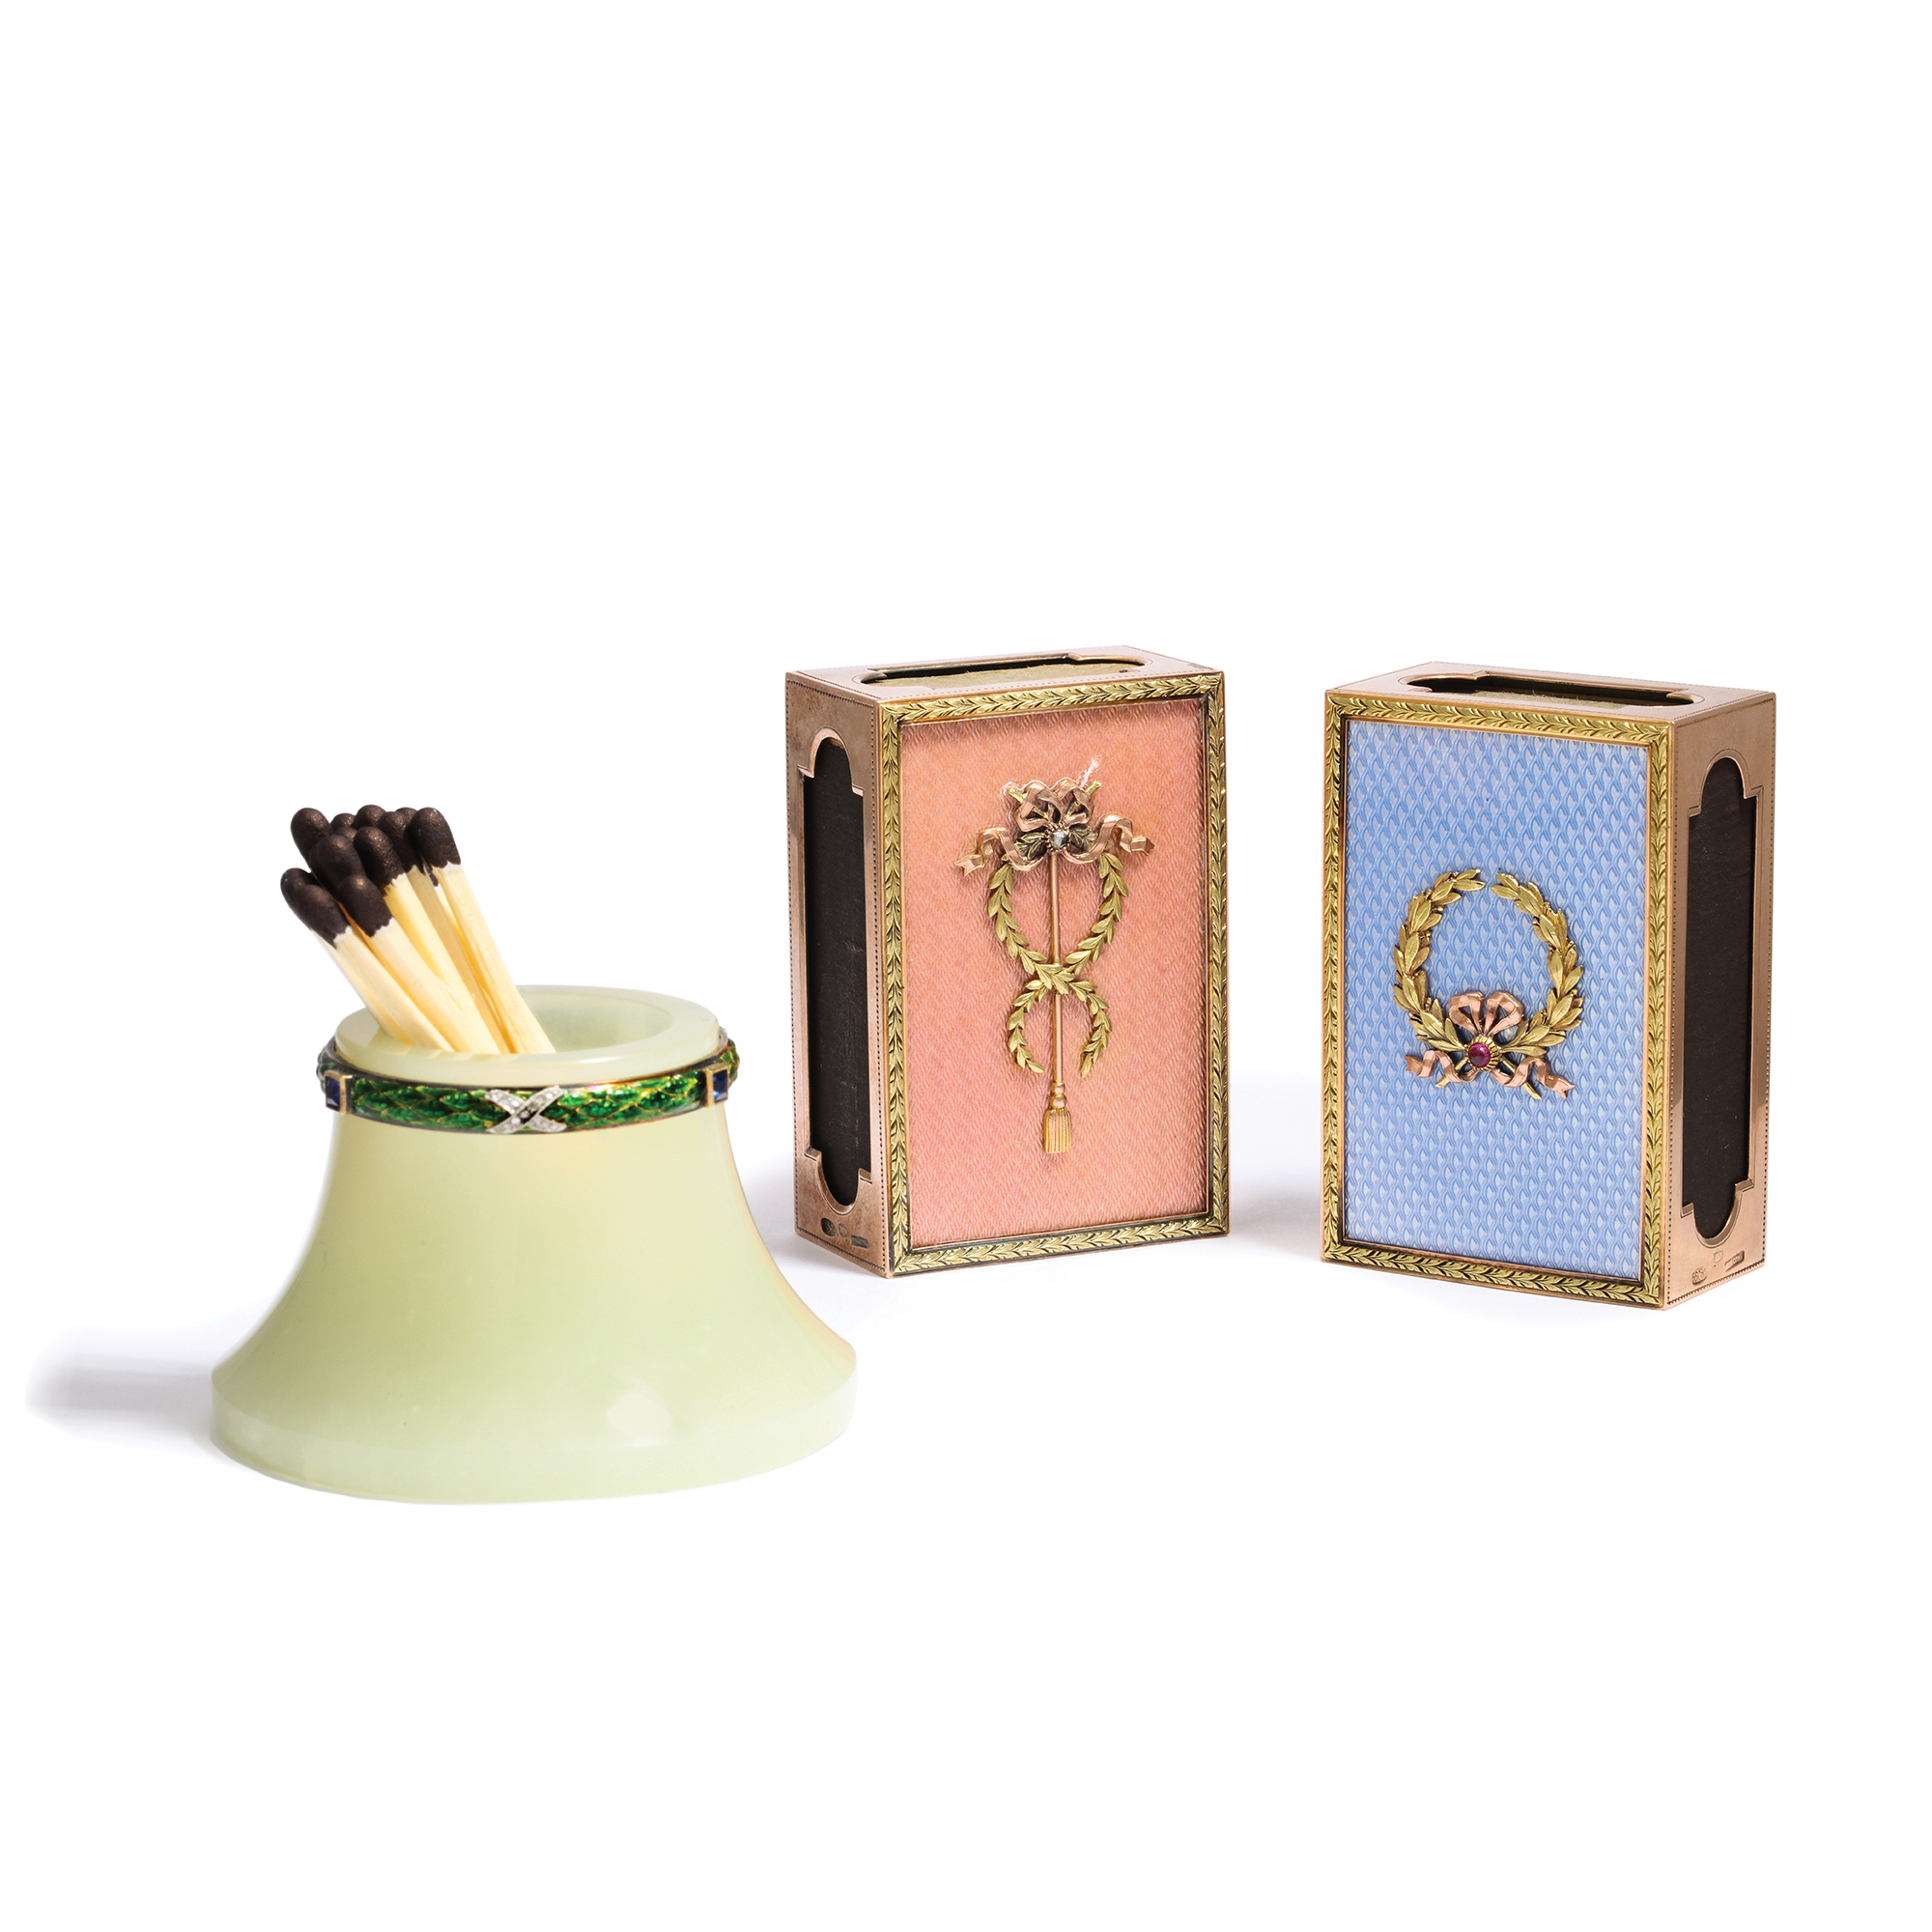 main view, Fabergé Matchstick Holder and Matchbox Covers